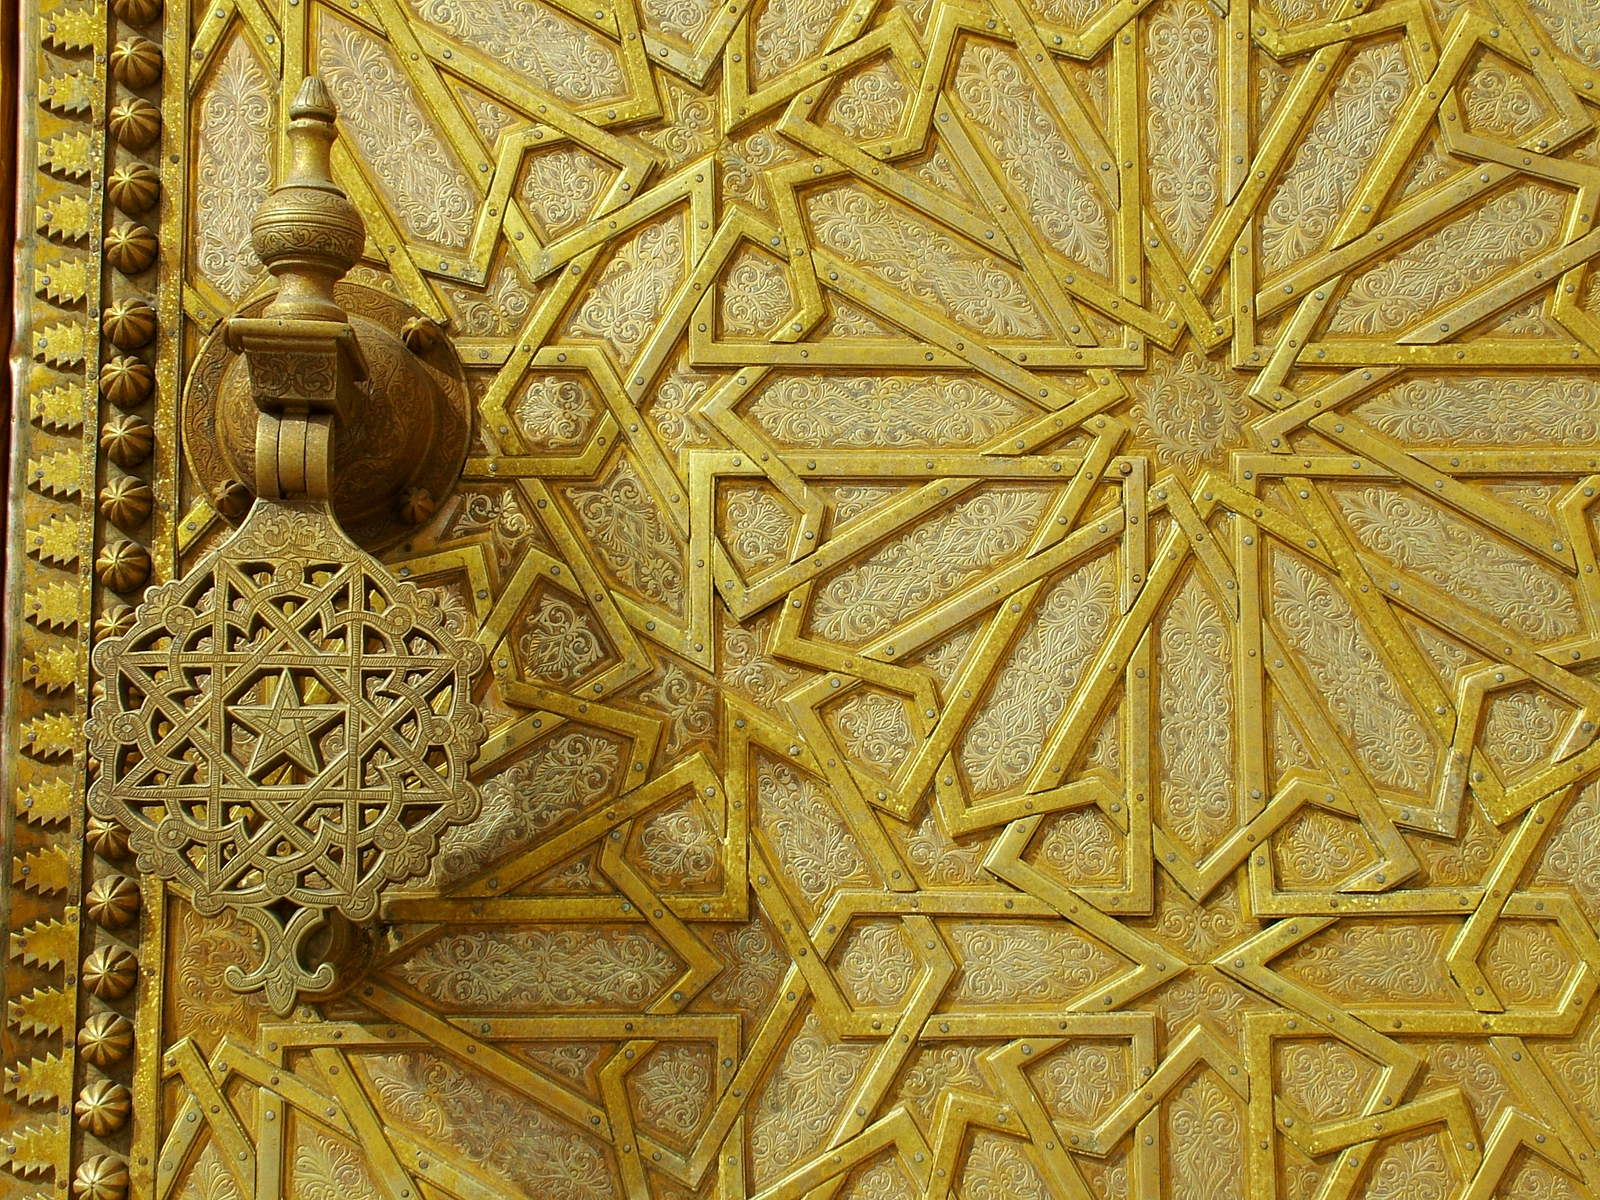 gold intricate design with a fire hydrant in the center